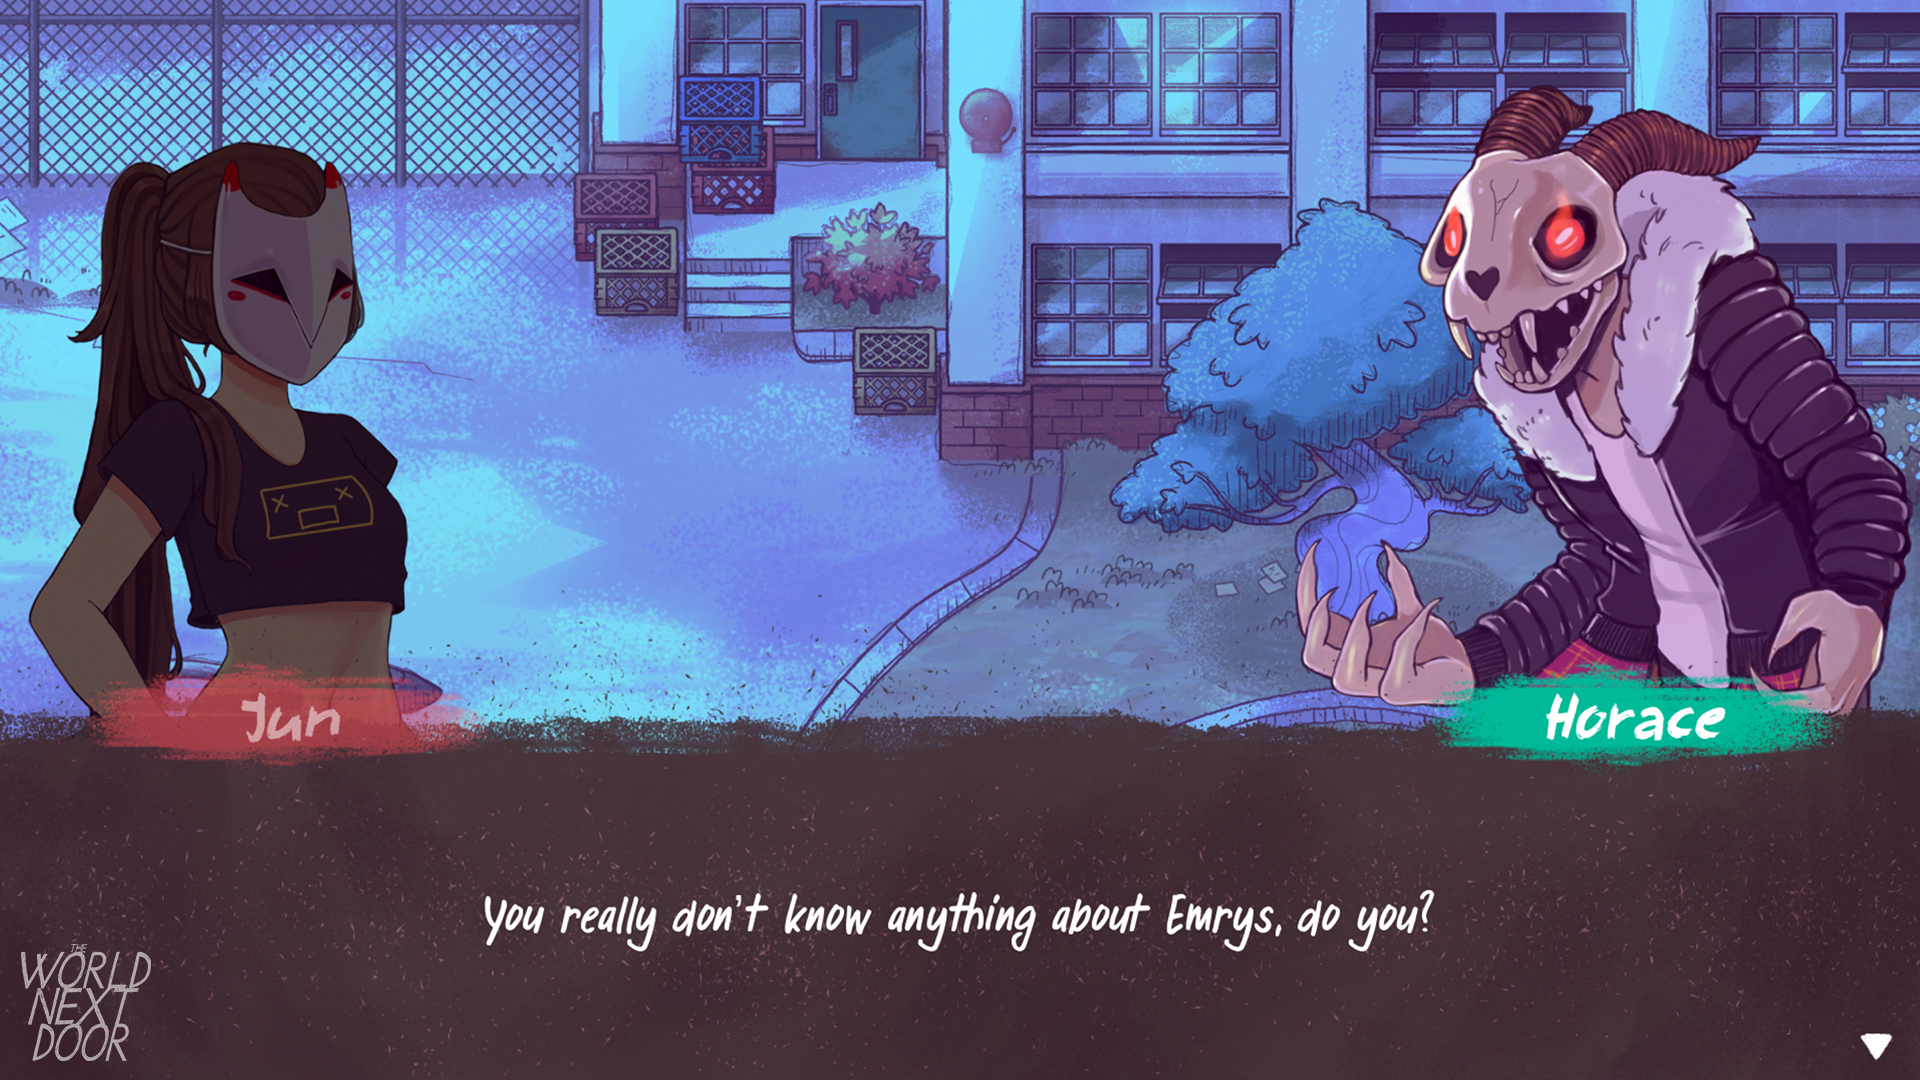 The World Next Door Turns Magical Brawls Into Puzzles